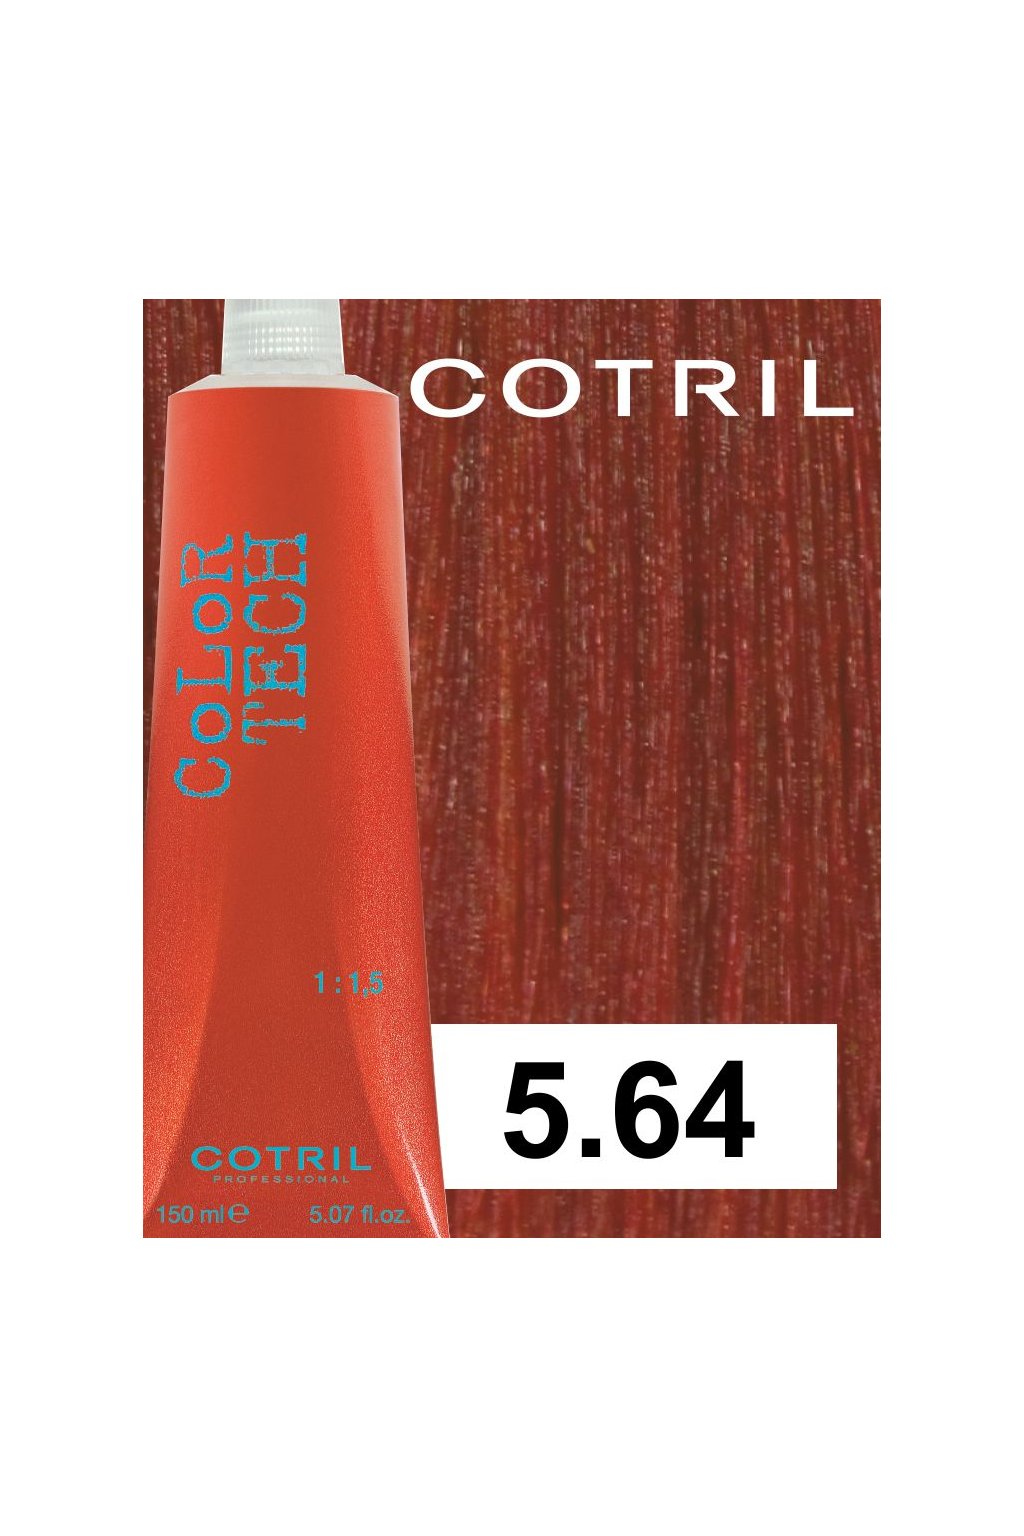 5 64 ct cotril